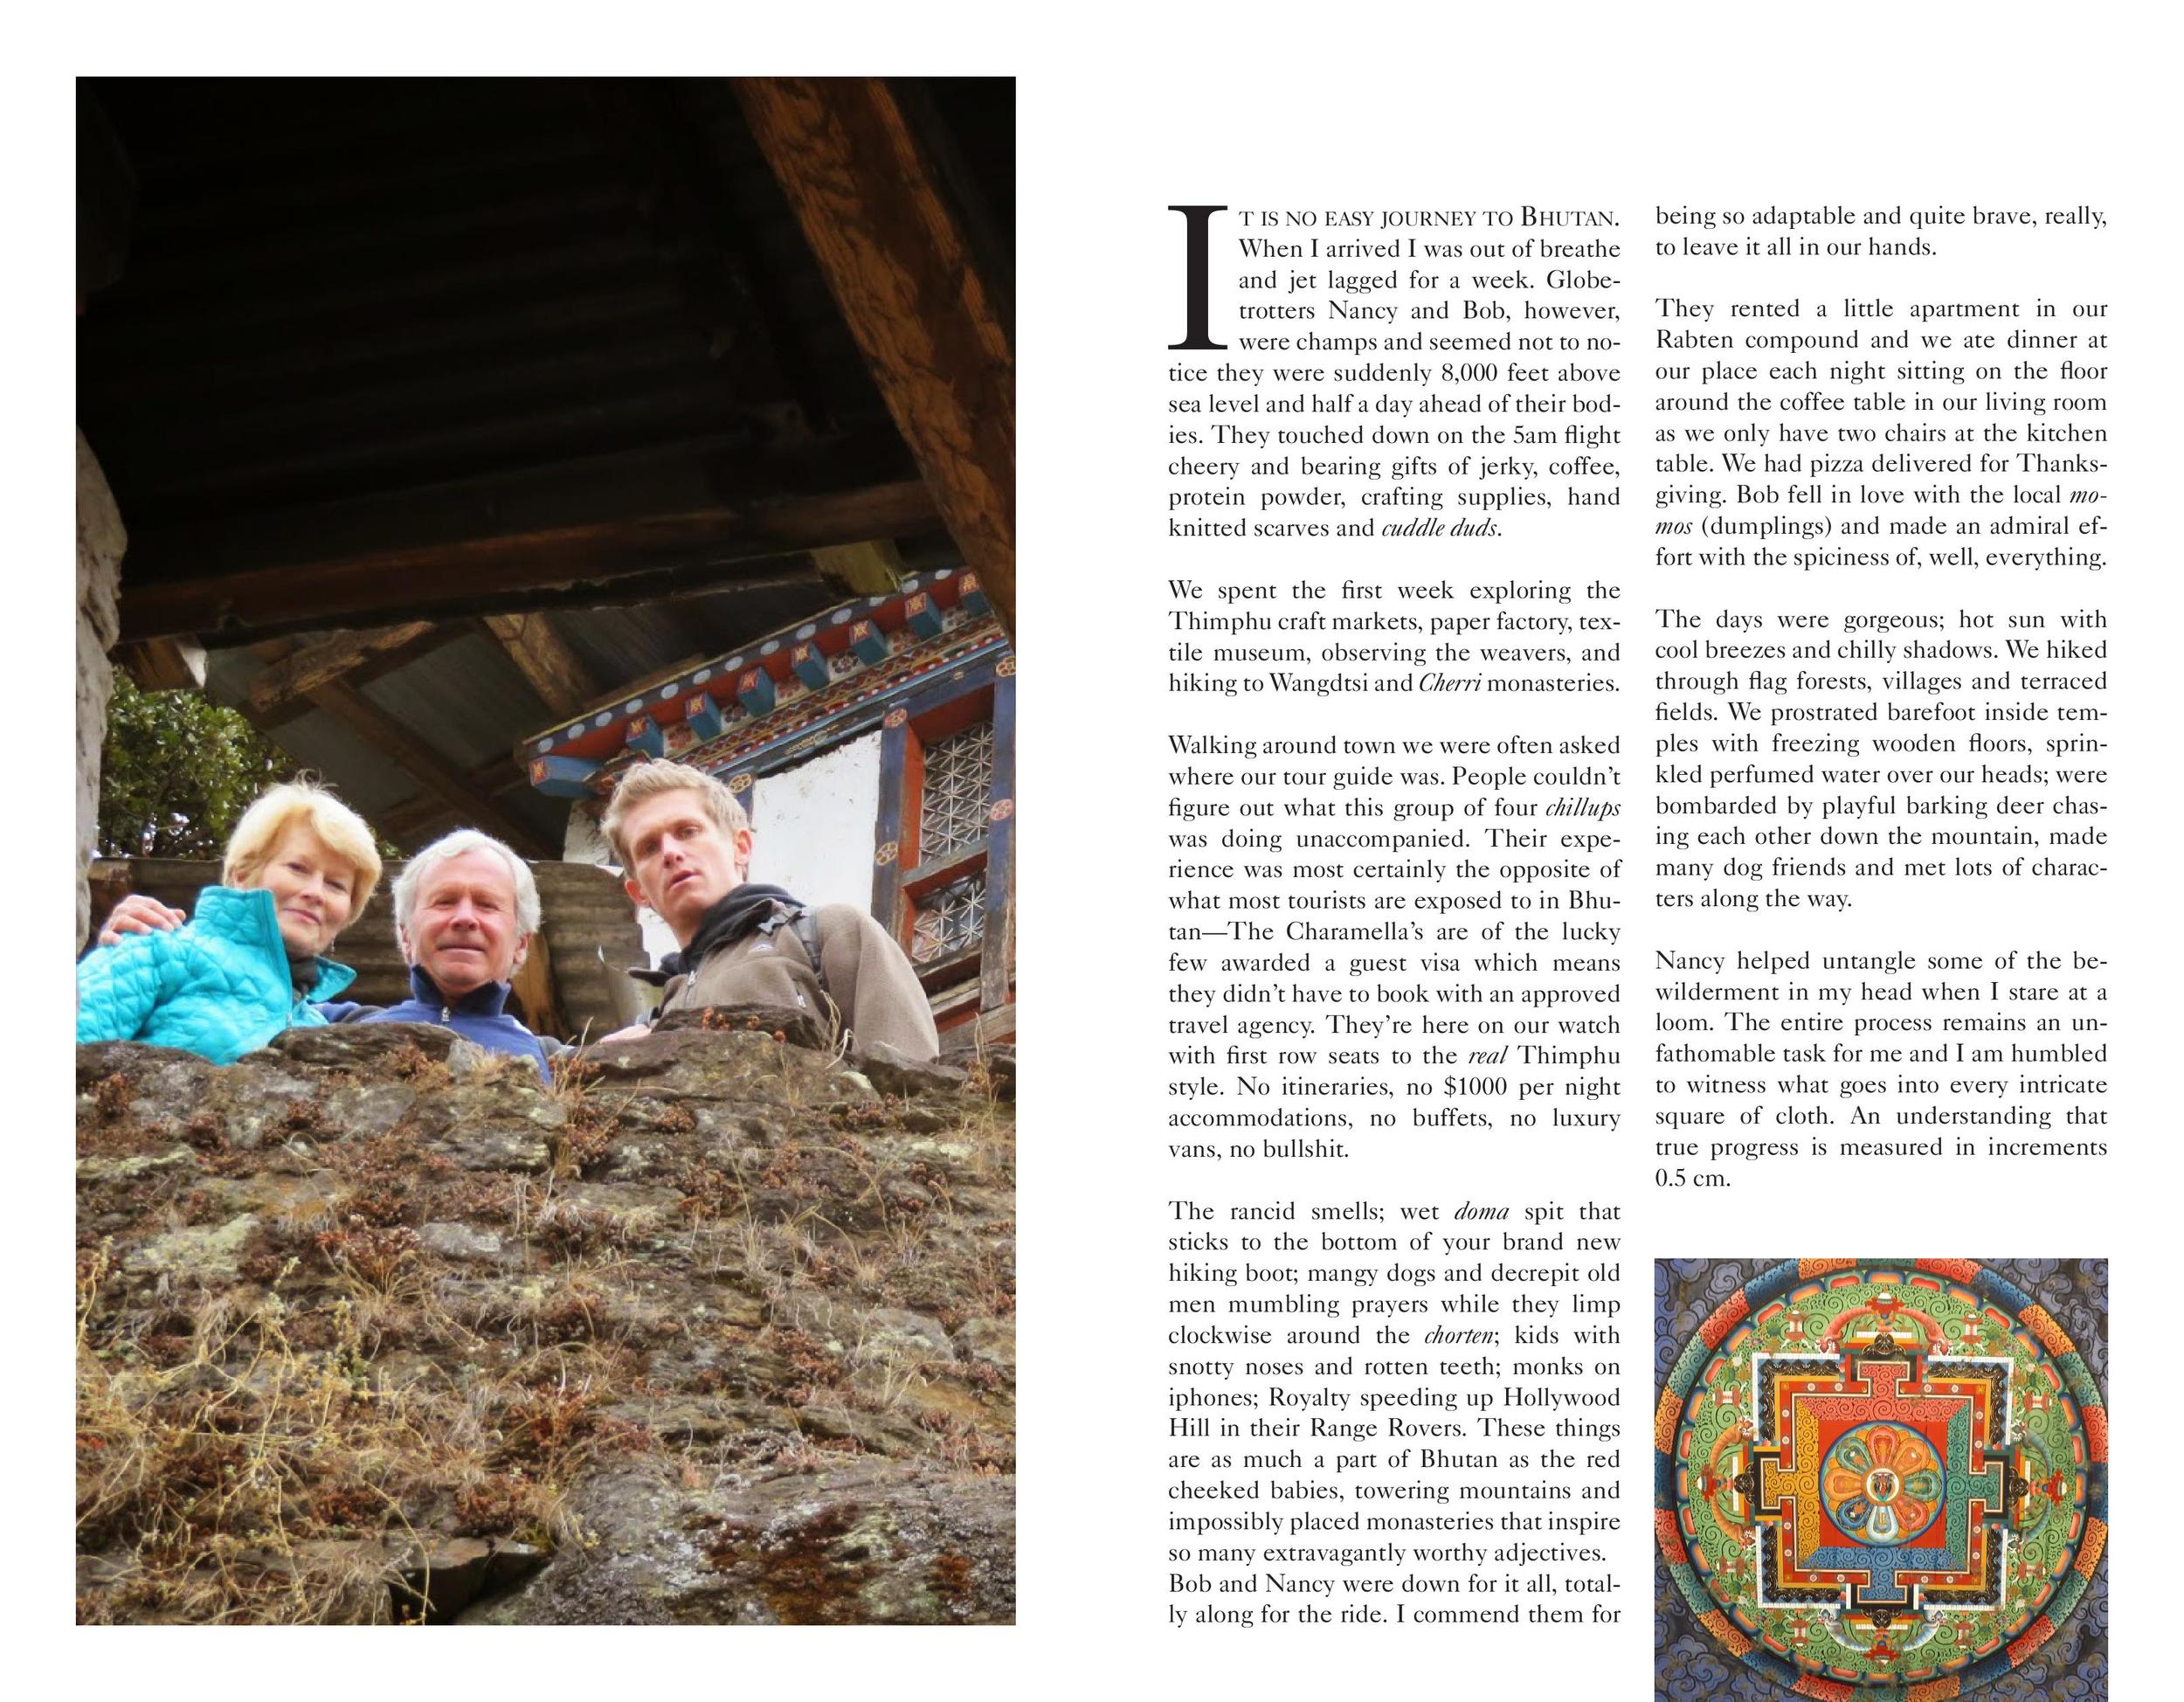 travels_with_a_burro_bhutan_02-page-009.jpg